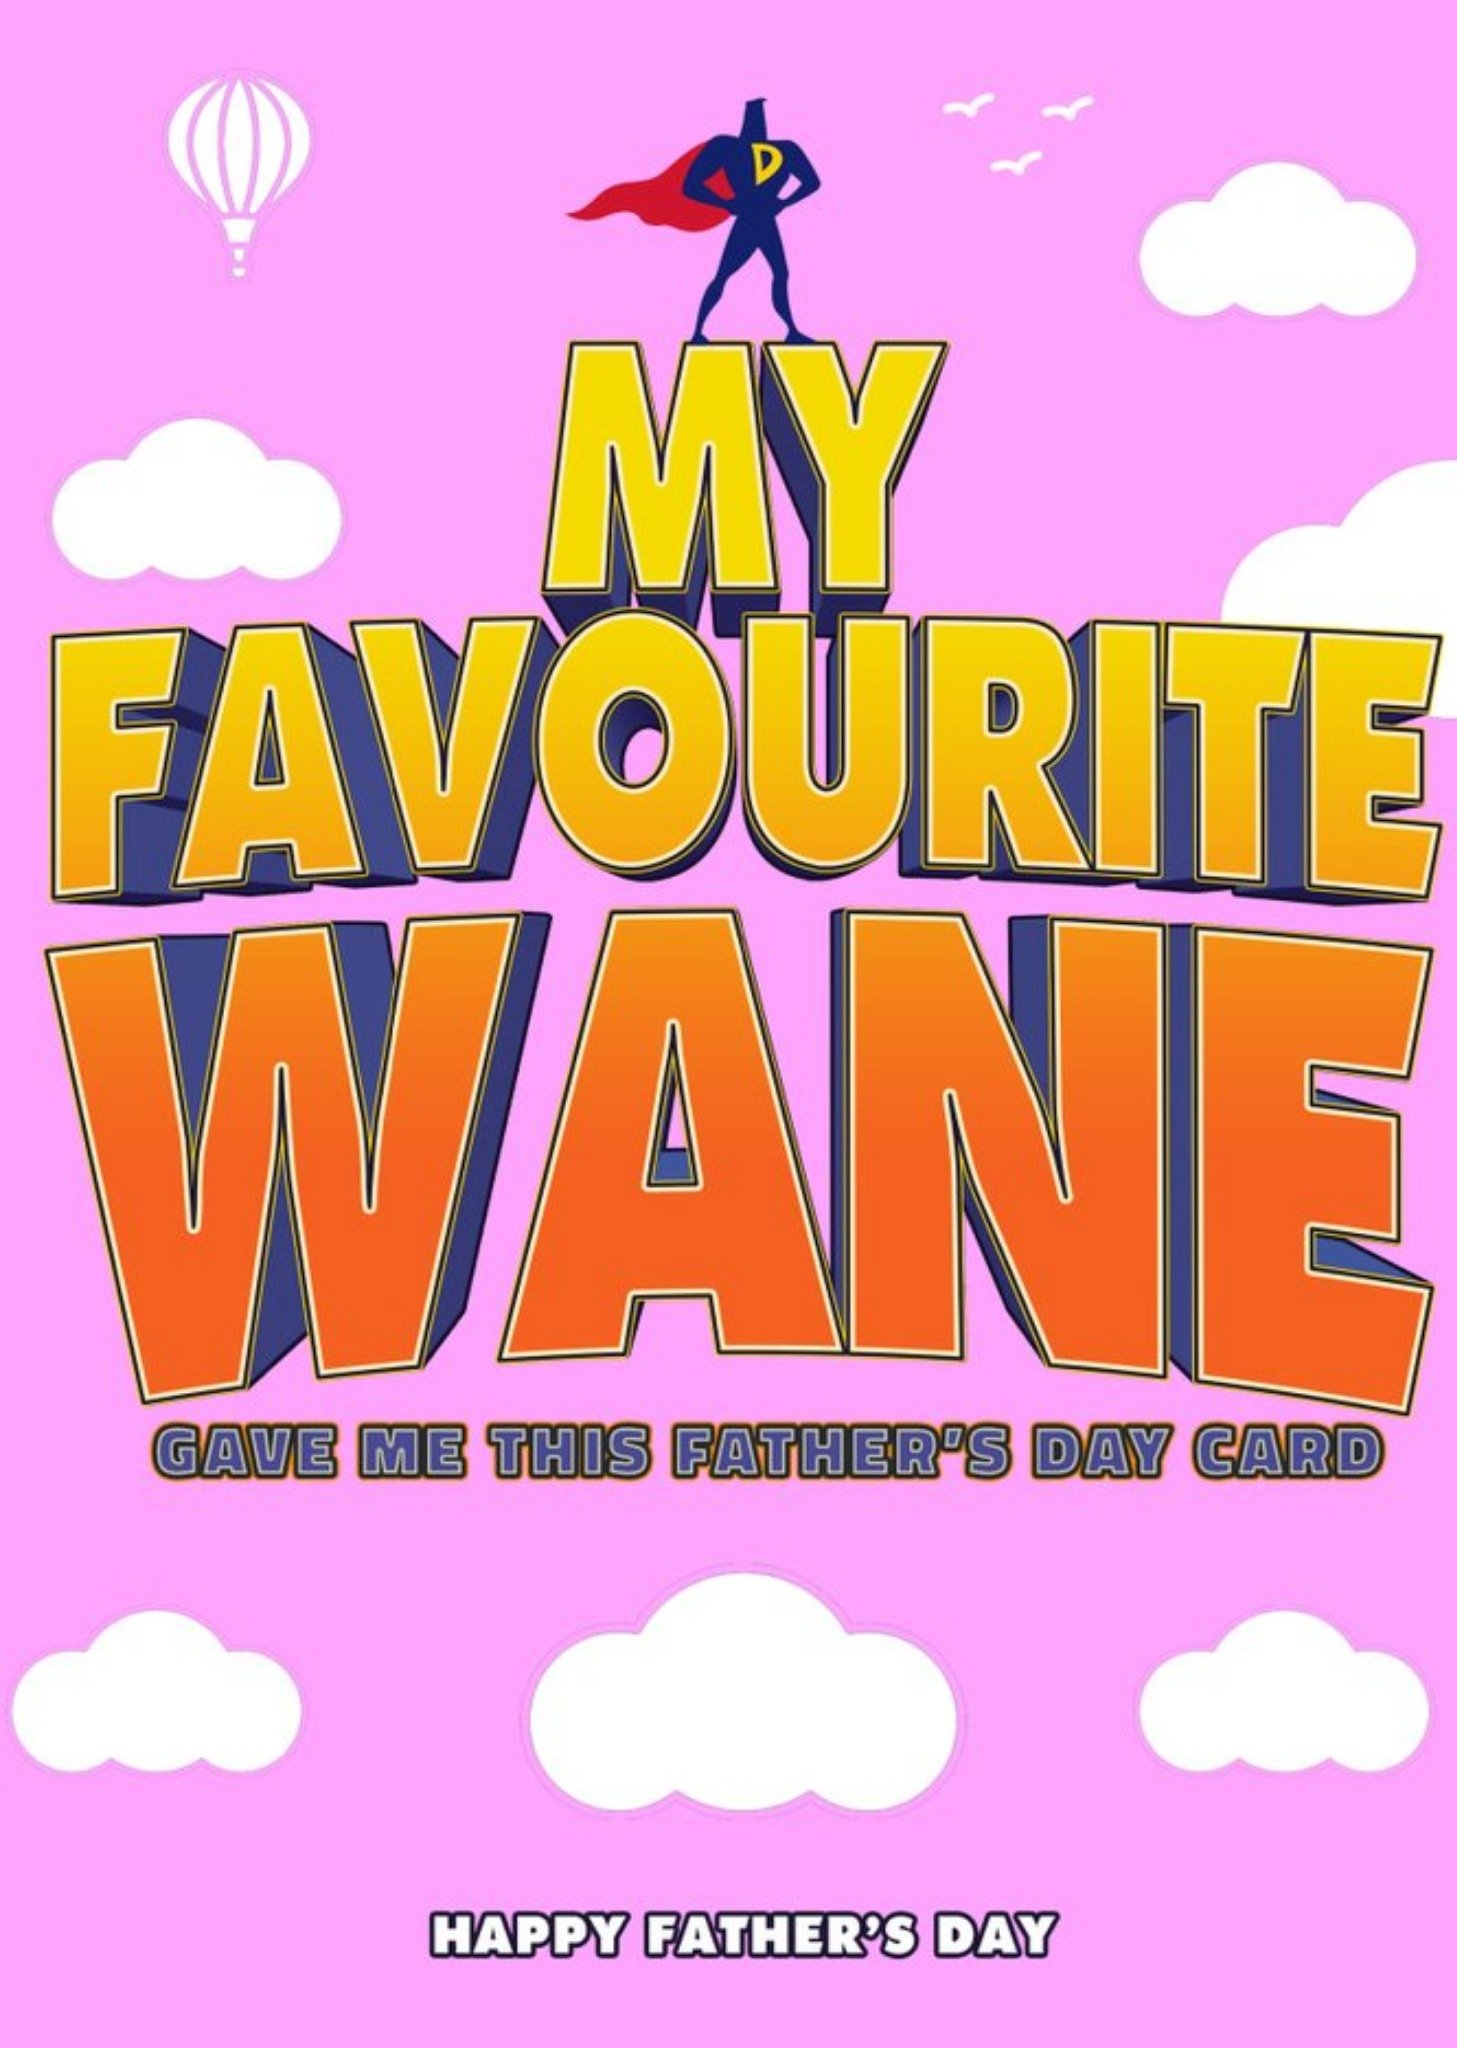 Moonpig Ferry Clever Funny Favourite Wane Illustrated Superhero Father's Day Card Ecard